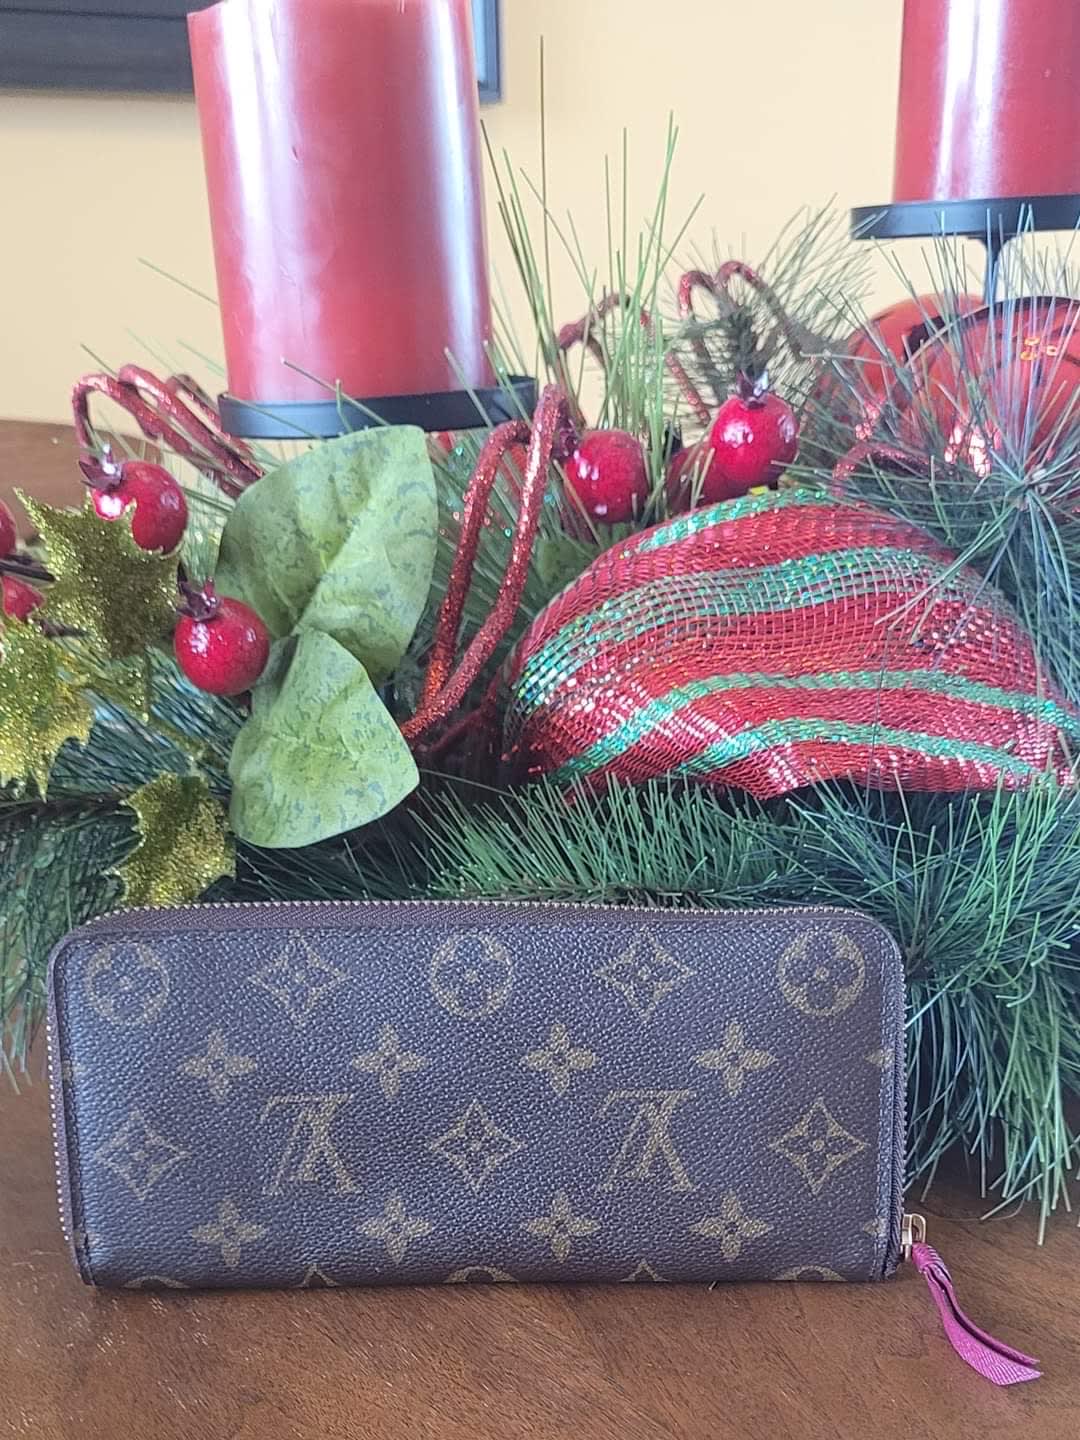 Louis Vuitton Sarah Wallet in Monogram and Fuchsia. LOVE how neat